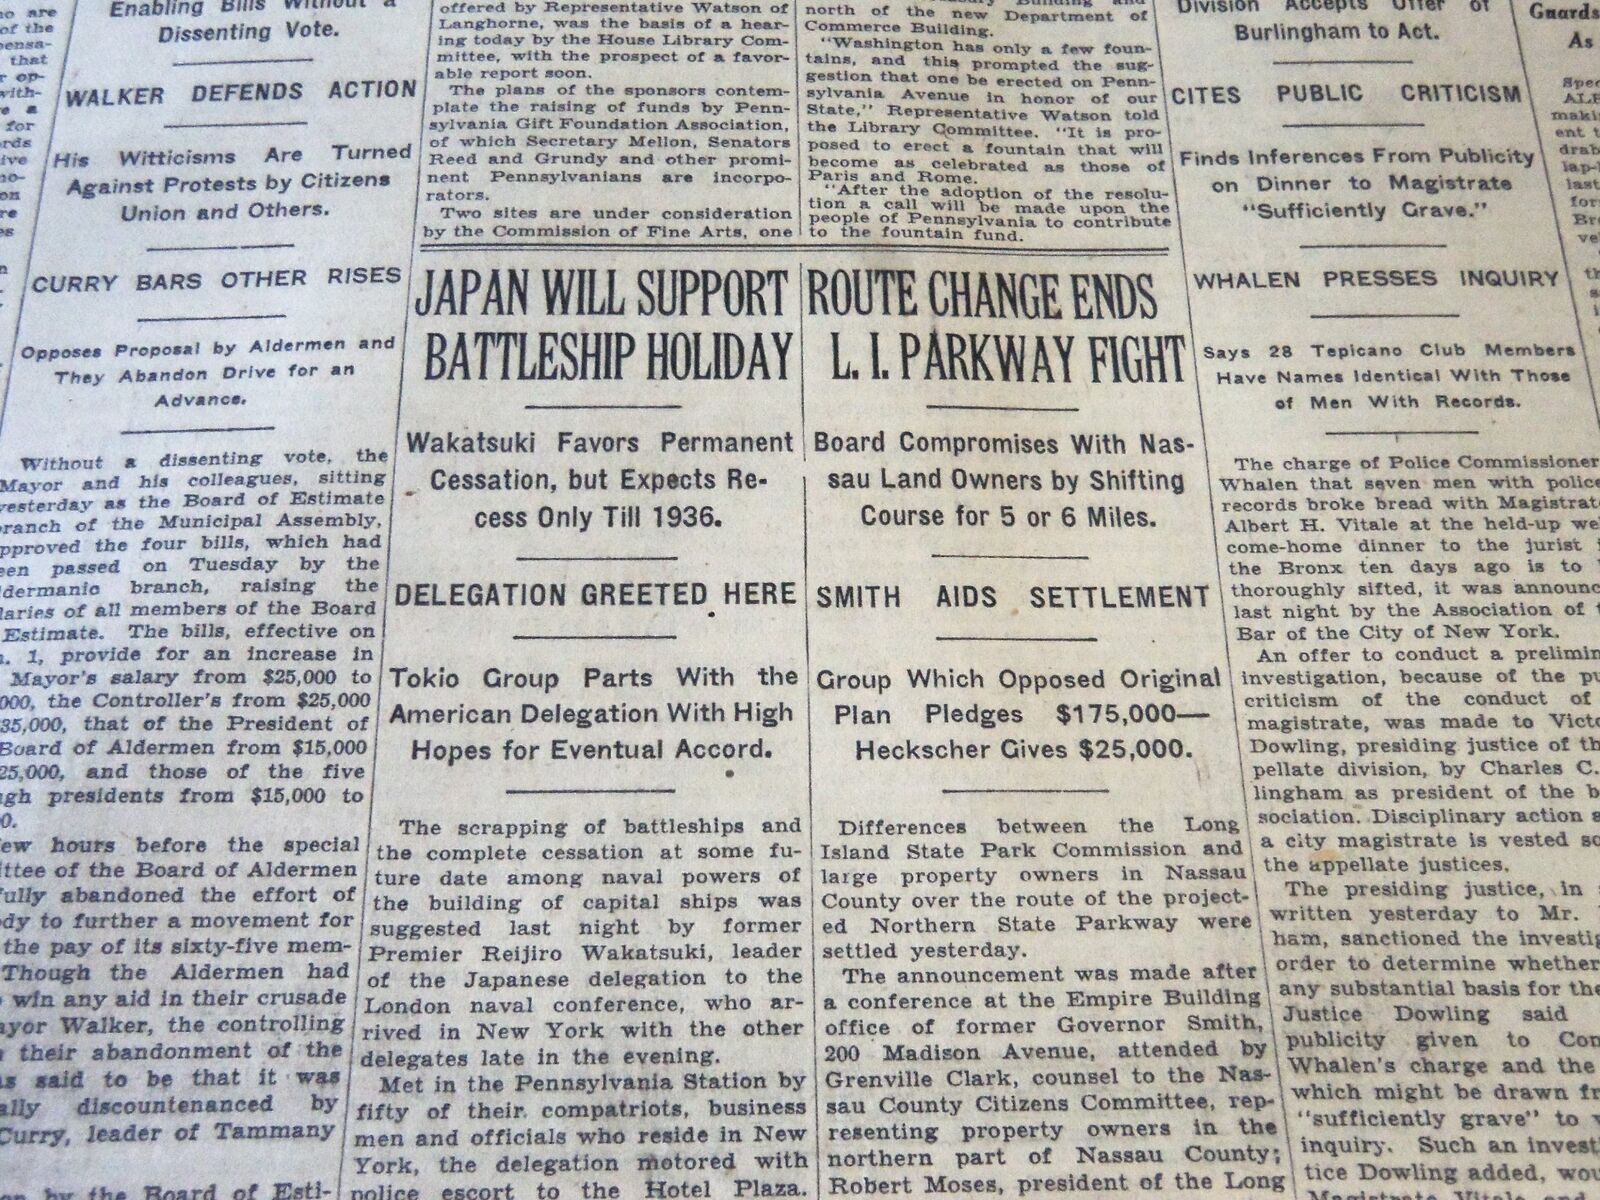 1929 DEC 20 NEW YORK TIMES - ROUTE CHANGE ENDS L. I. PARKWAY FIGHT - NT 6560